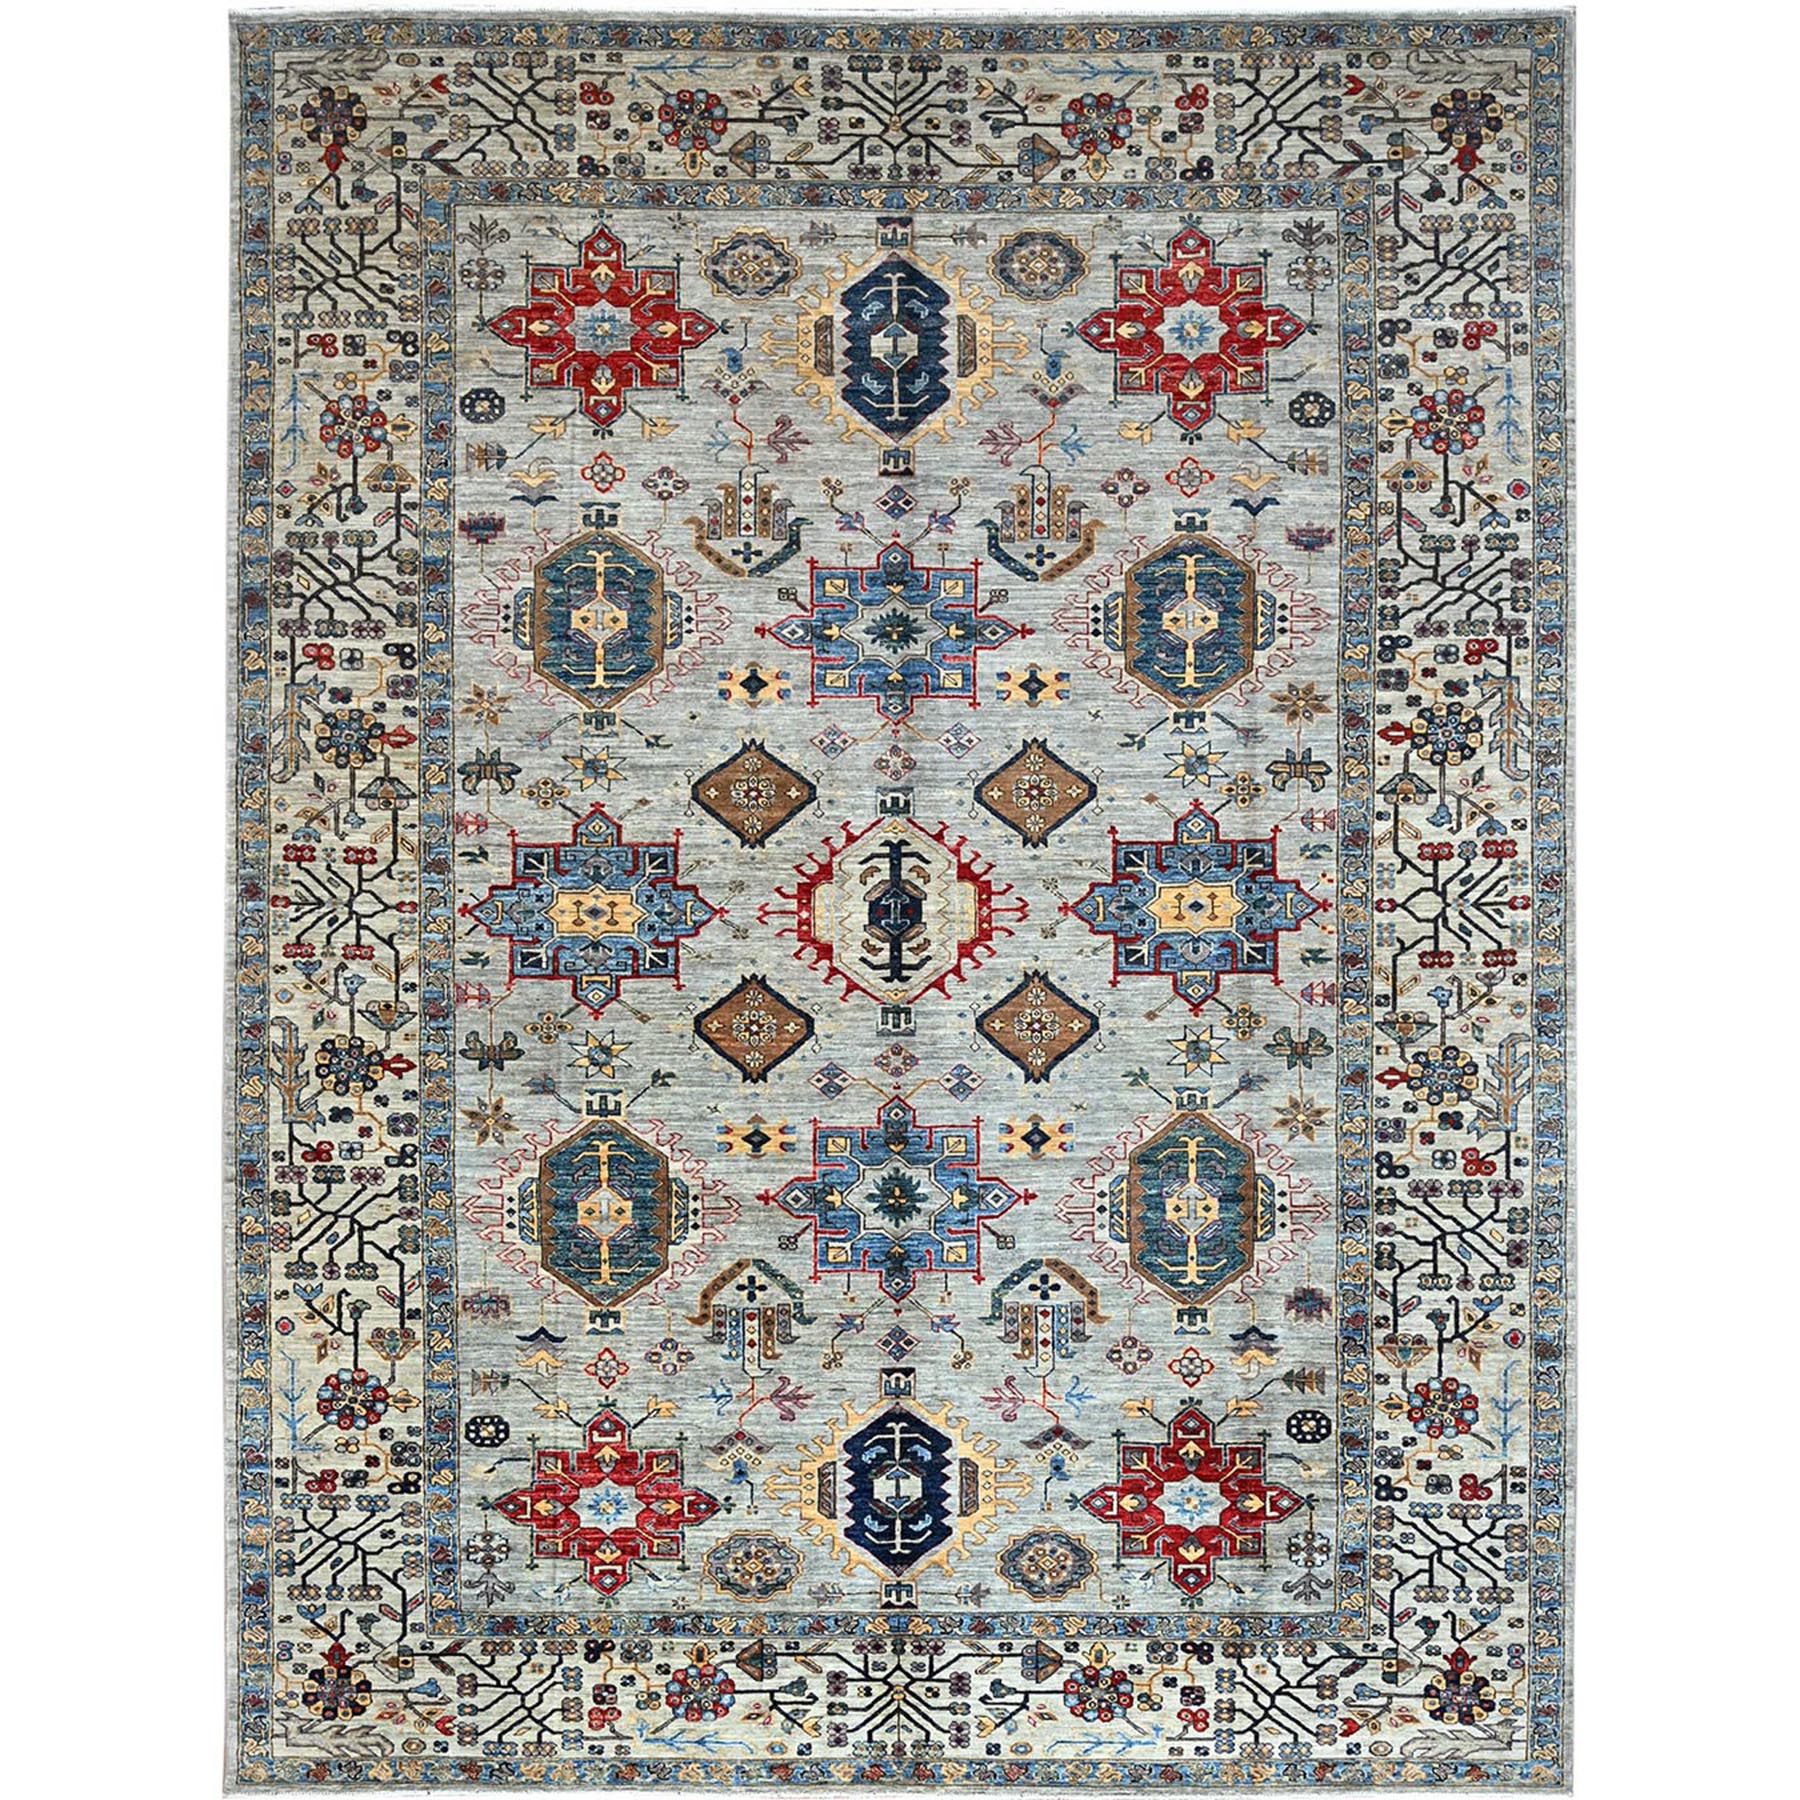 Pigeon Gray With Swiss Coffee White, 100% Wool, Afghan Super Kazak with Large Geometric Medallions Pattern, Densely Woven Natural Dyes, Hand Knotted, Oriental Rug